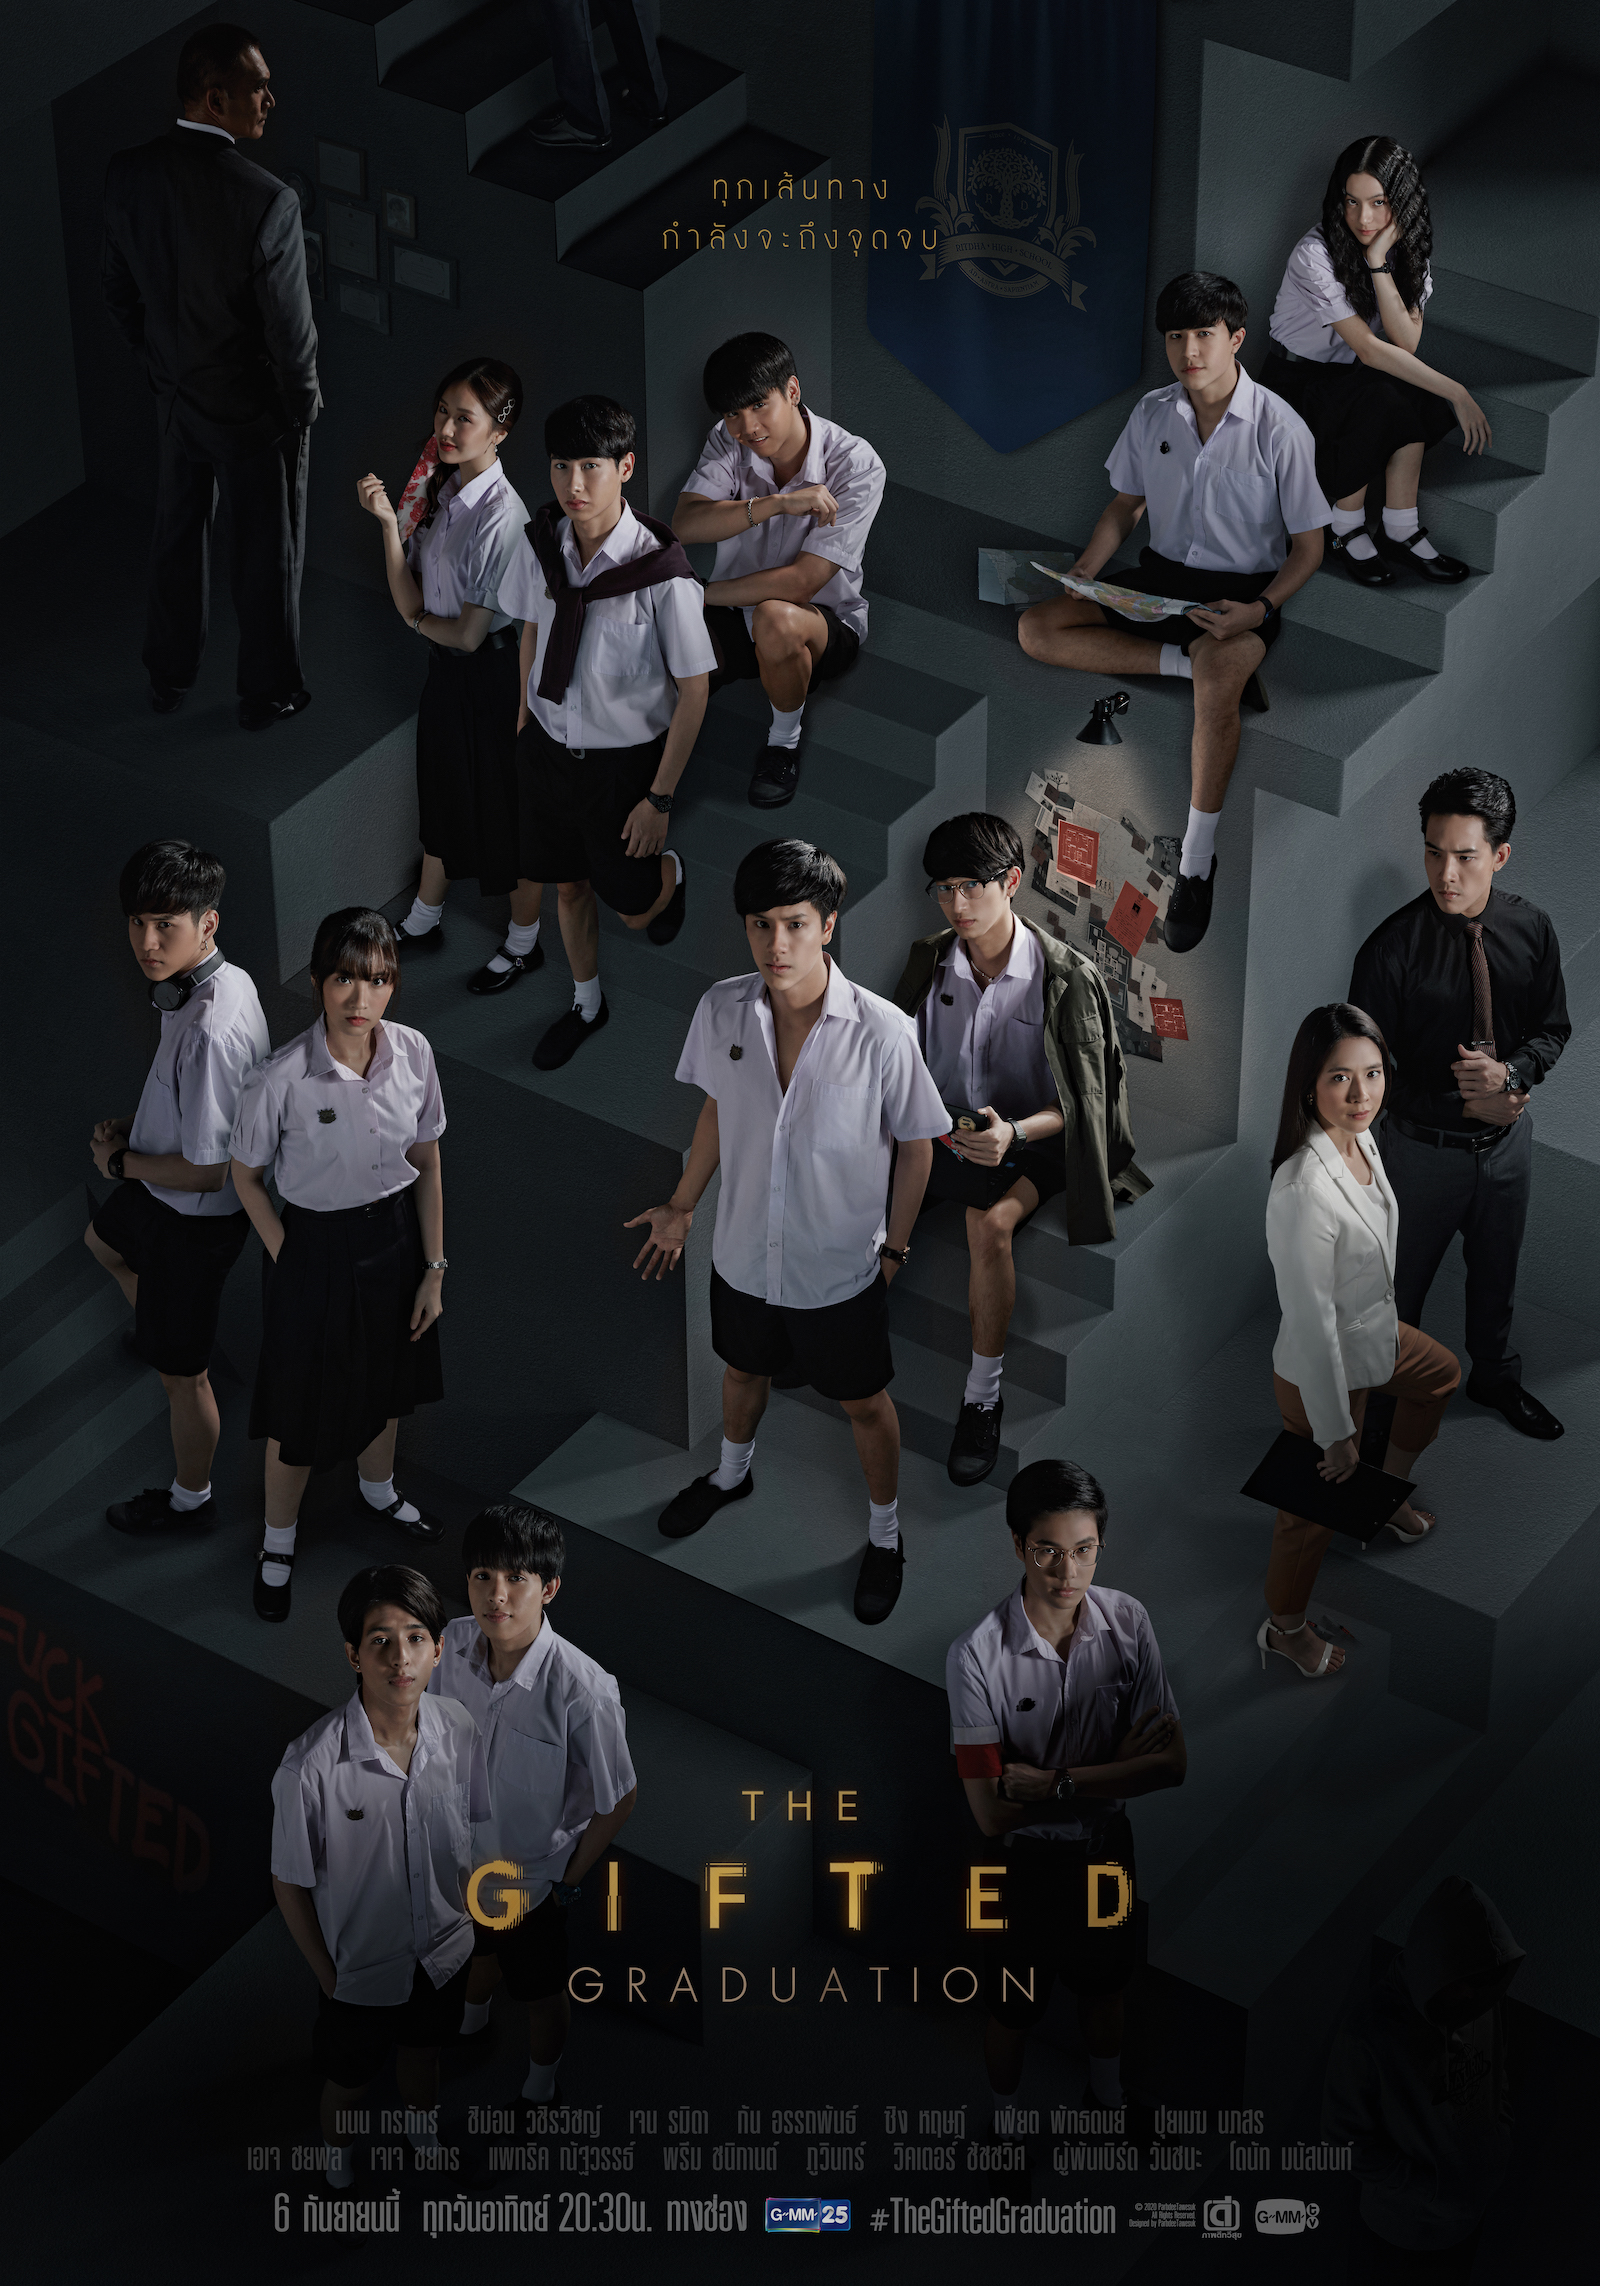 『The Gifted Graduation』